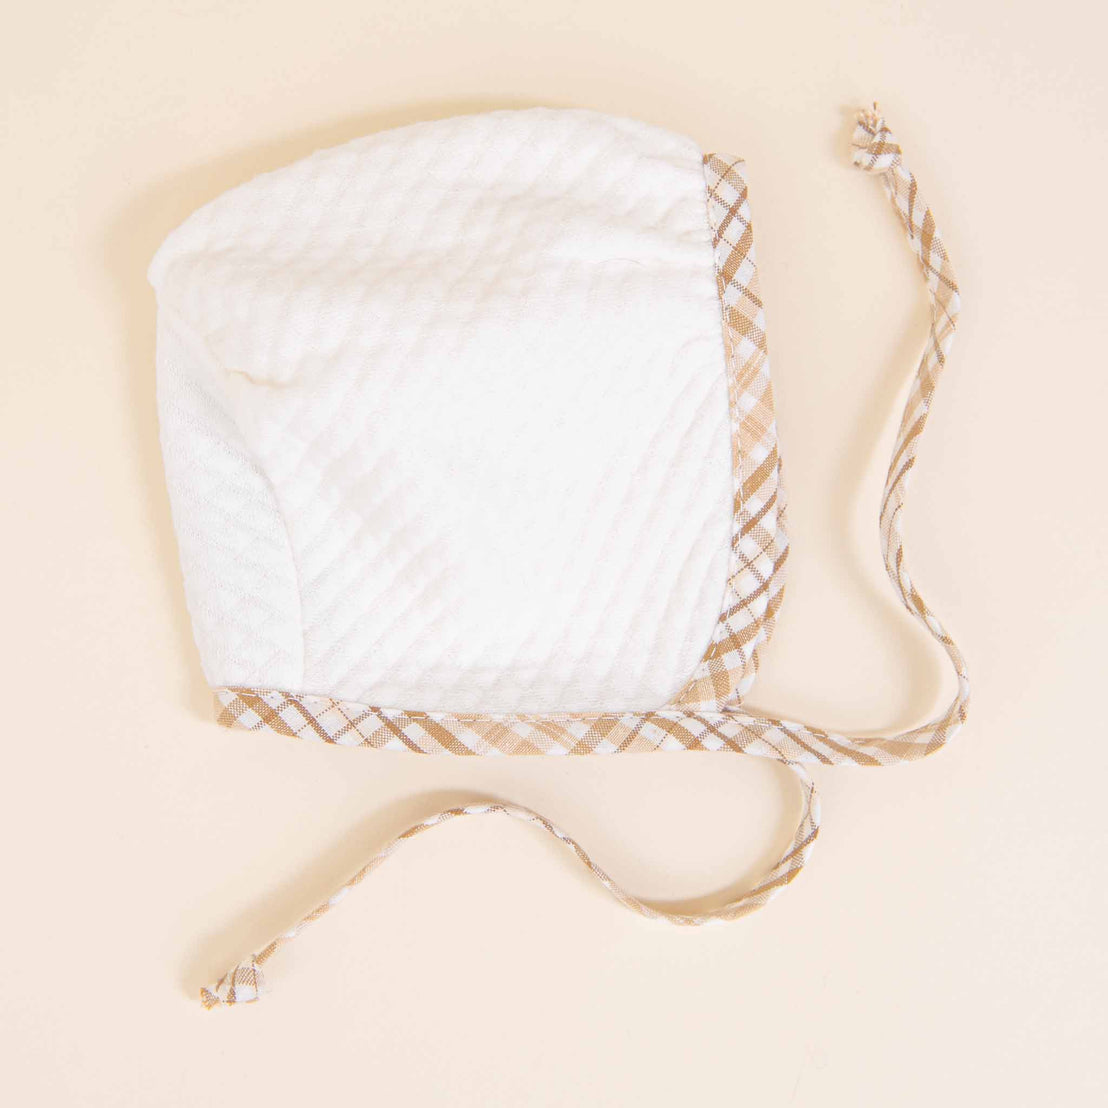 A white quilted Dylan Newborn Gift Set bonnet with a brown and beige checkered trim and ties, laid flat on a light beige background.